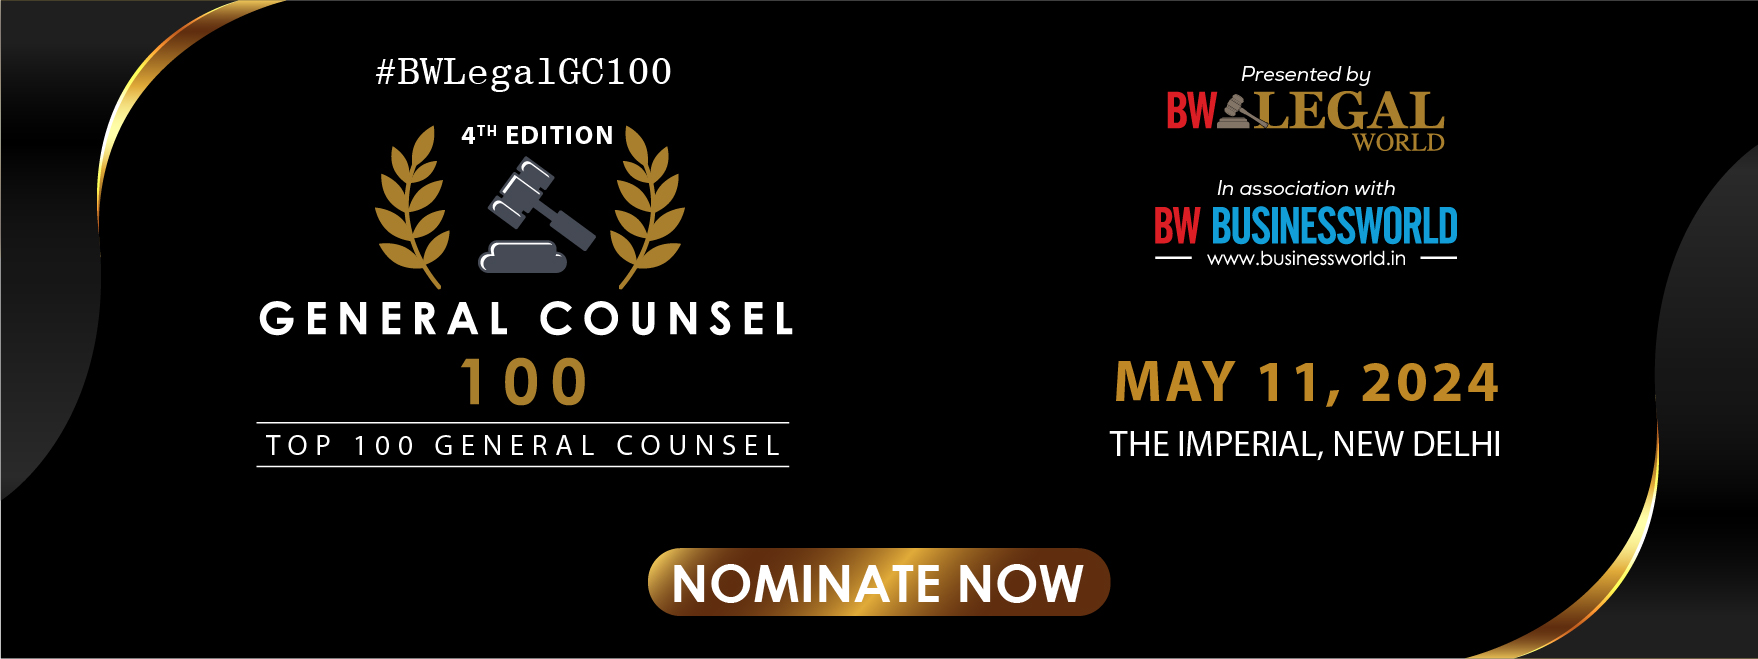 BW legal top 100 General Counsel